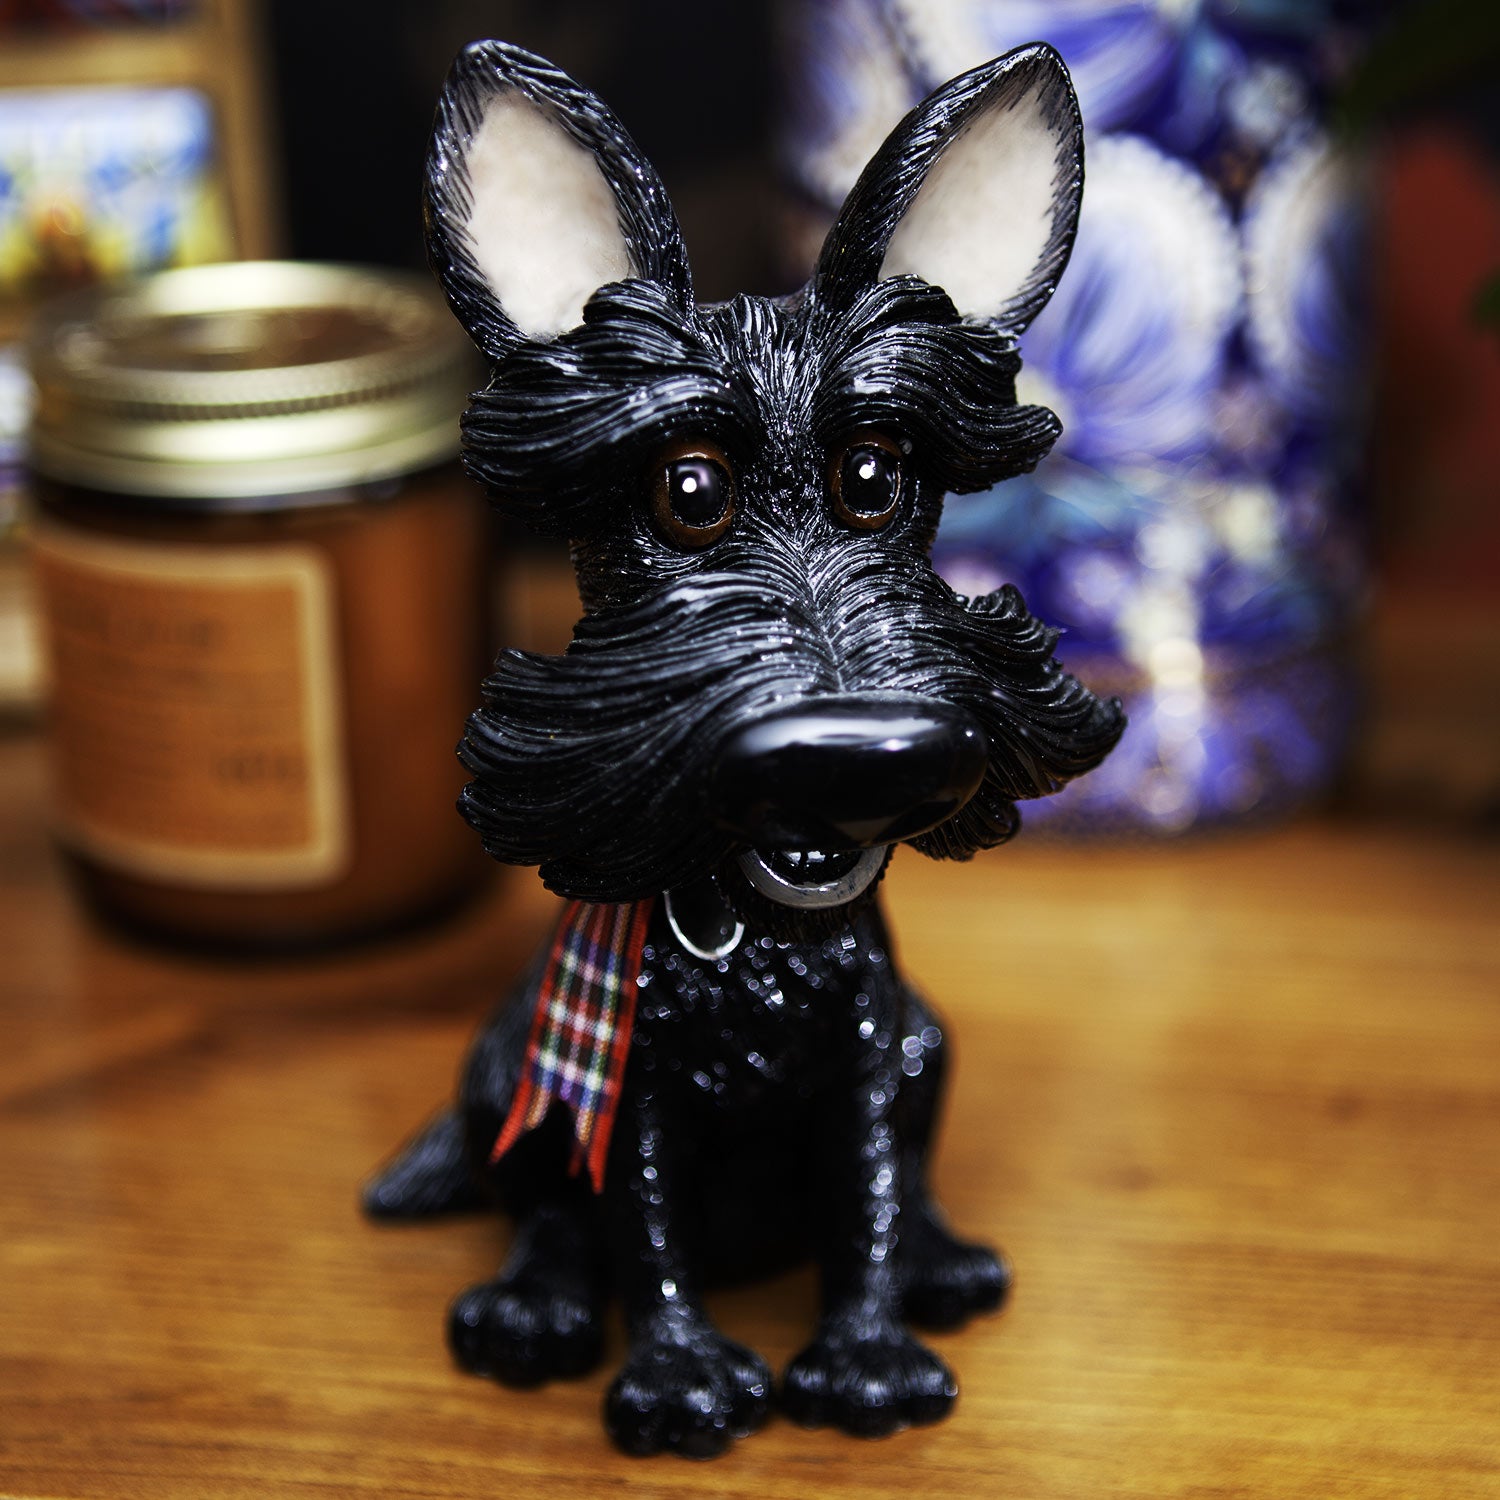 Dog Lover Gifts available at Dog Krazy Gifts - Sooty The Scottish Terrier - part of the Little Paws range available from DogKrazyGifts.co.uk